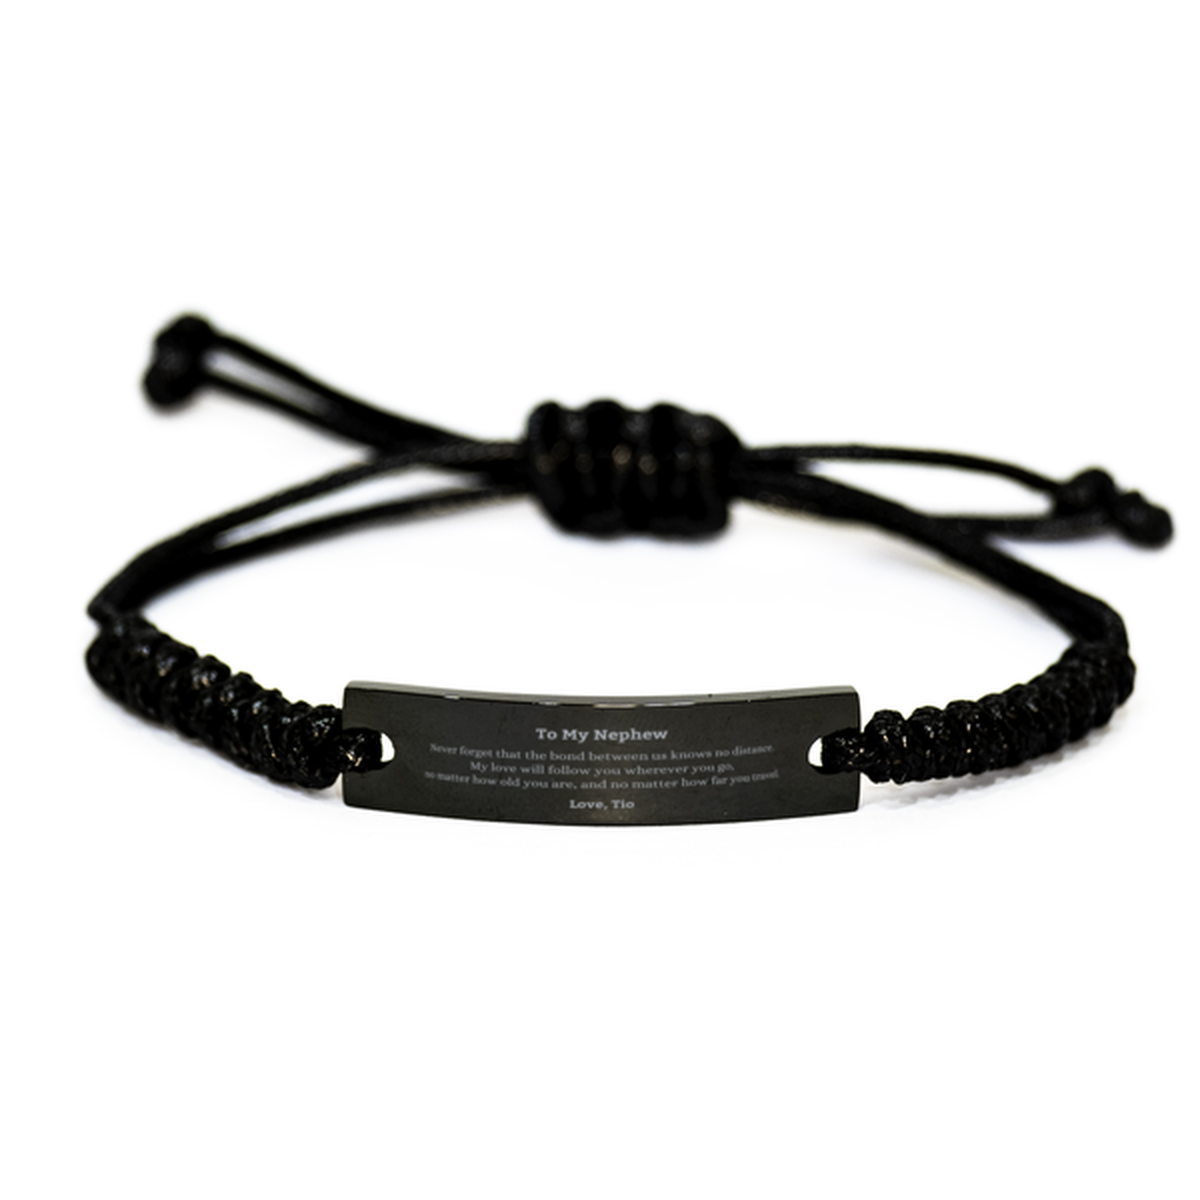 Nephew Birthday Gifts from Tio, Adjustable Black Rope Bracelet for Nephew Christmas Graduation Unique Gifts Nephew Never forget that the bond between us knows no distance. Love, Tio